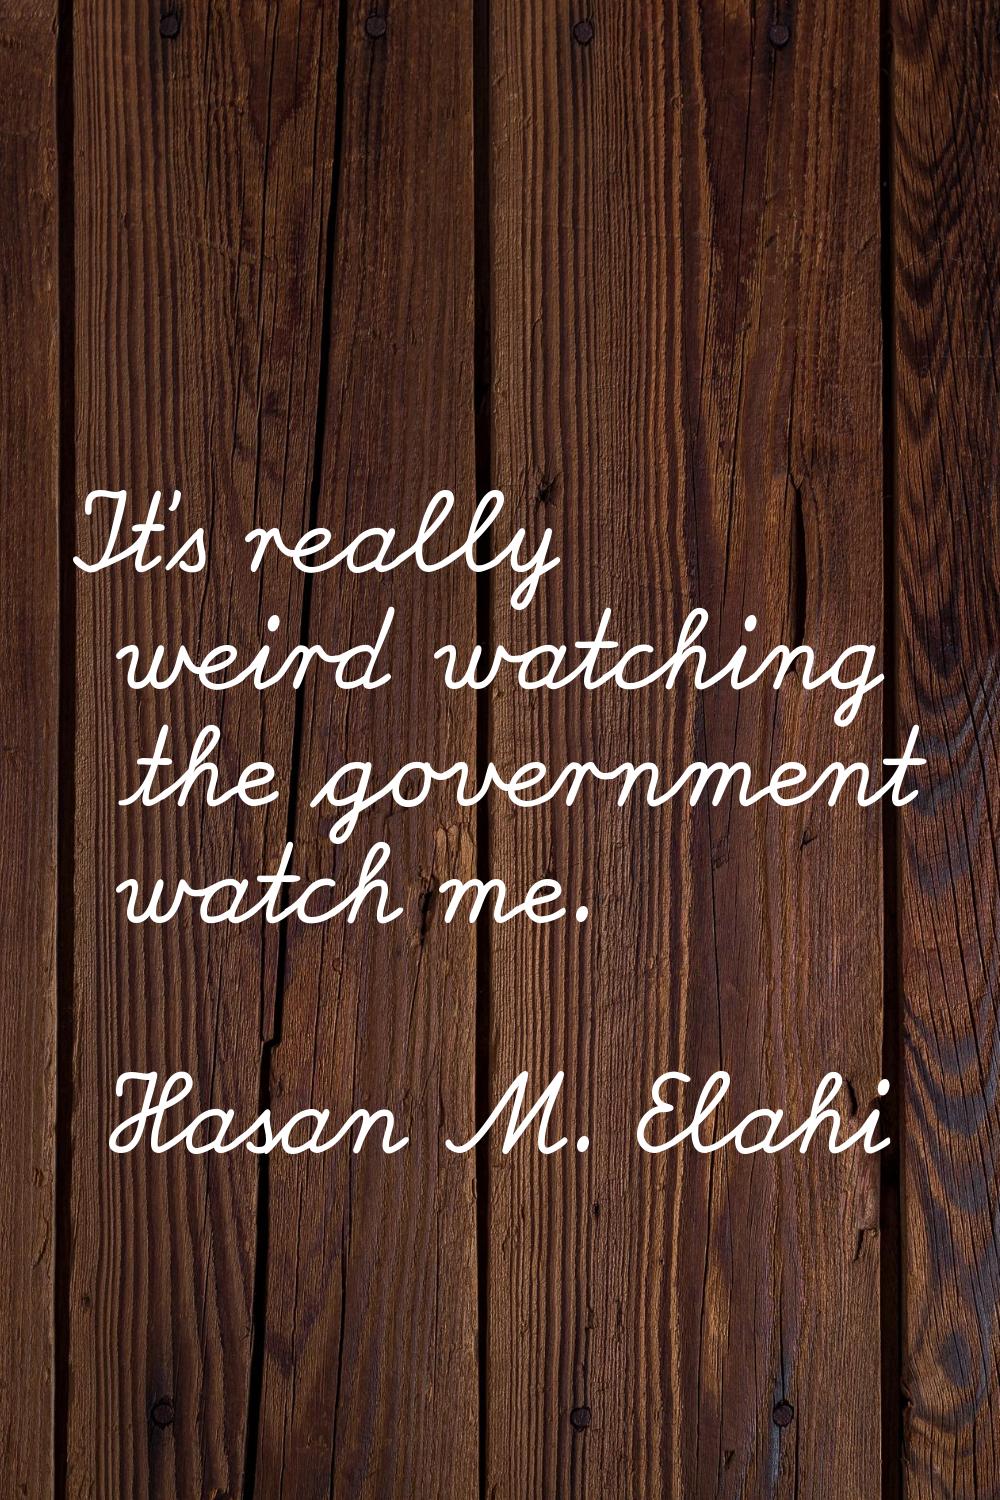 It's really weird watching the government watch me.